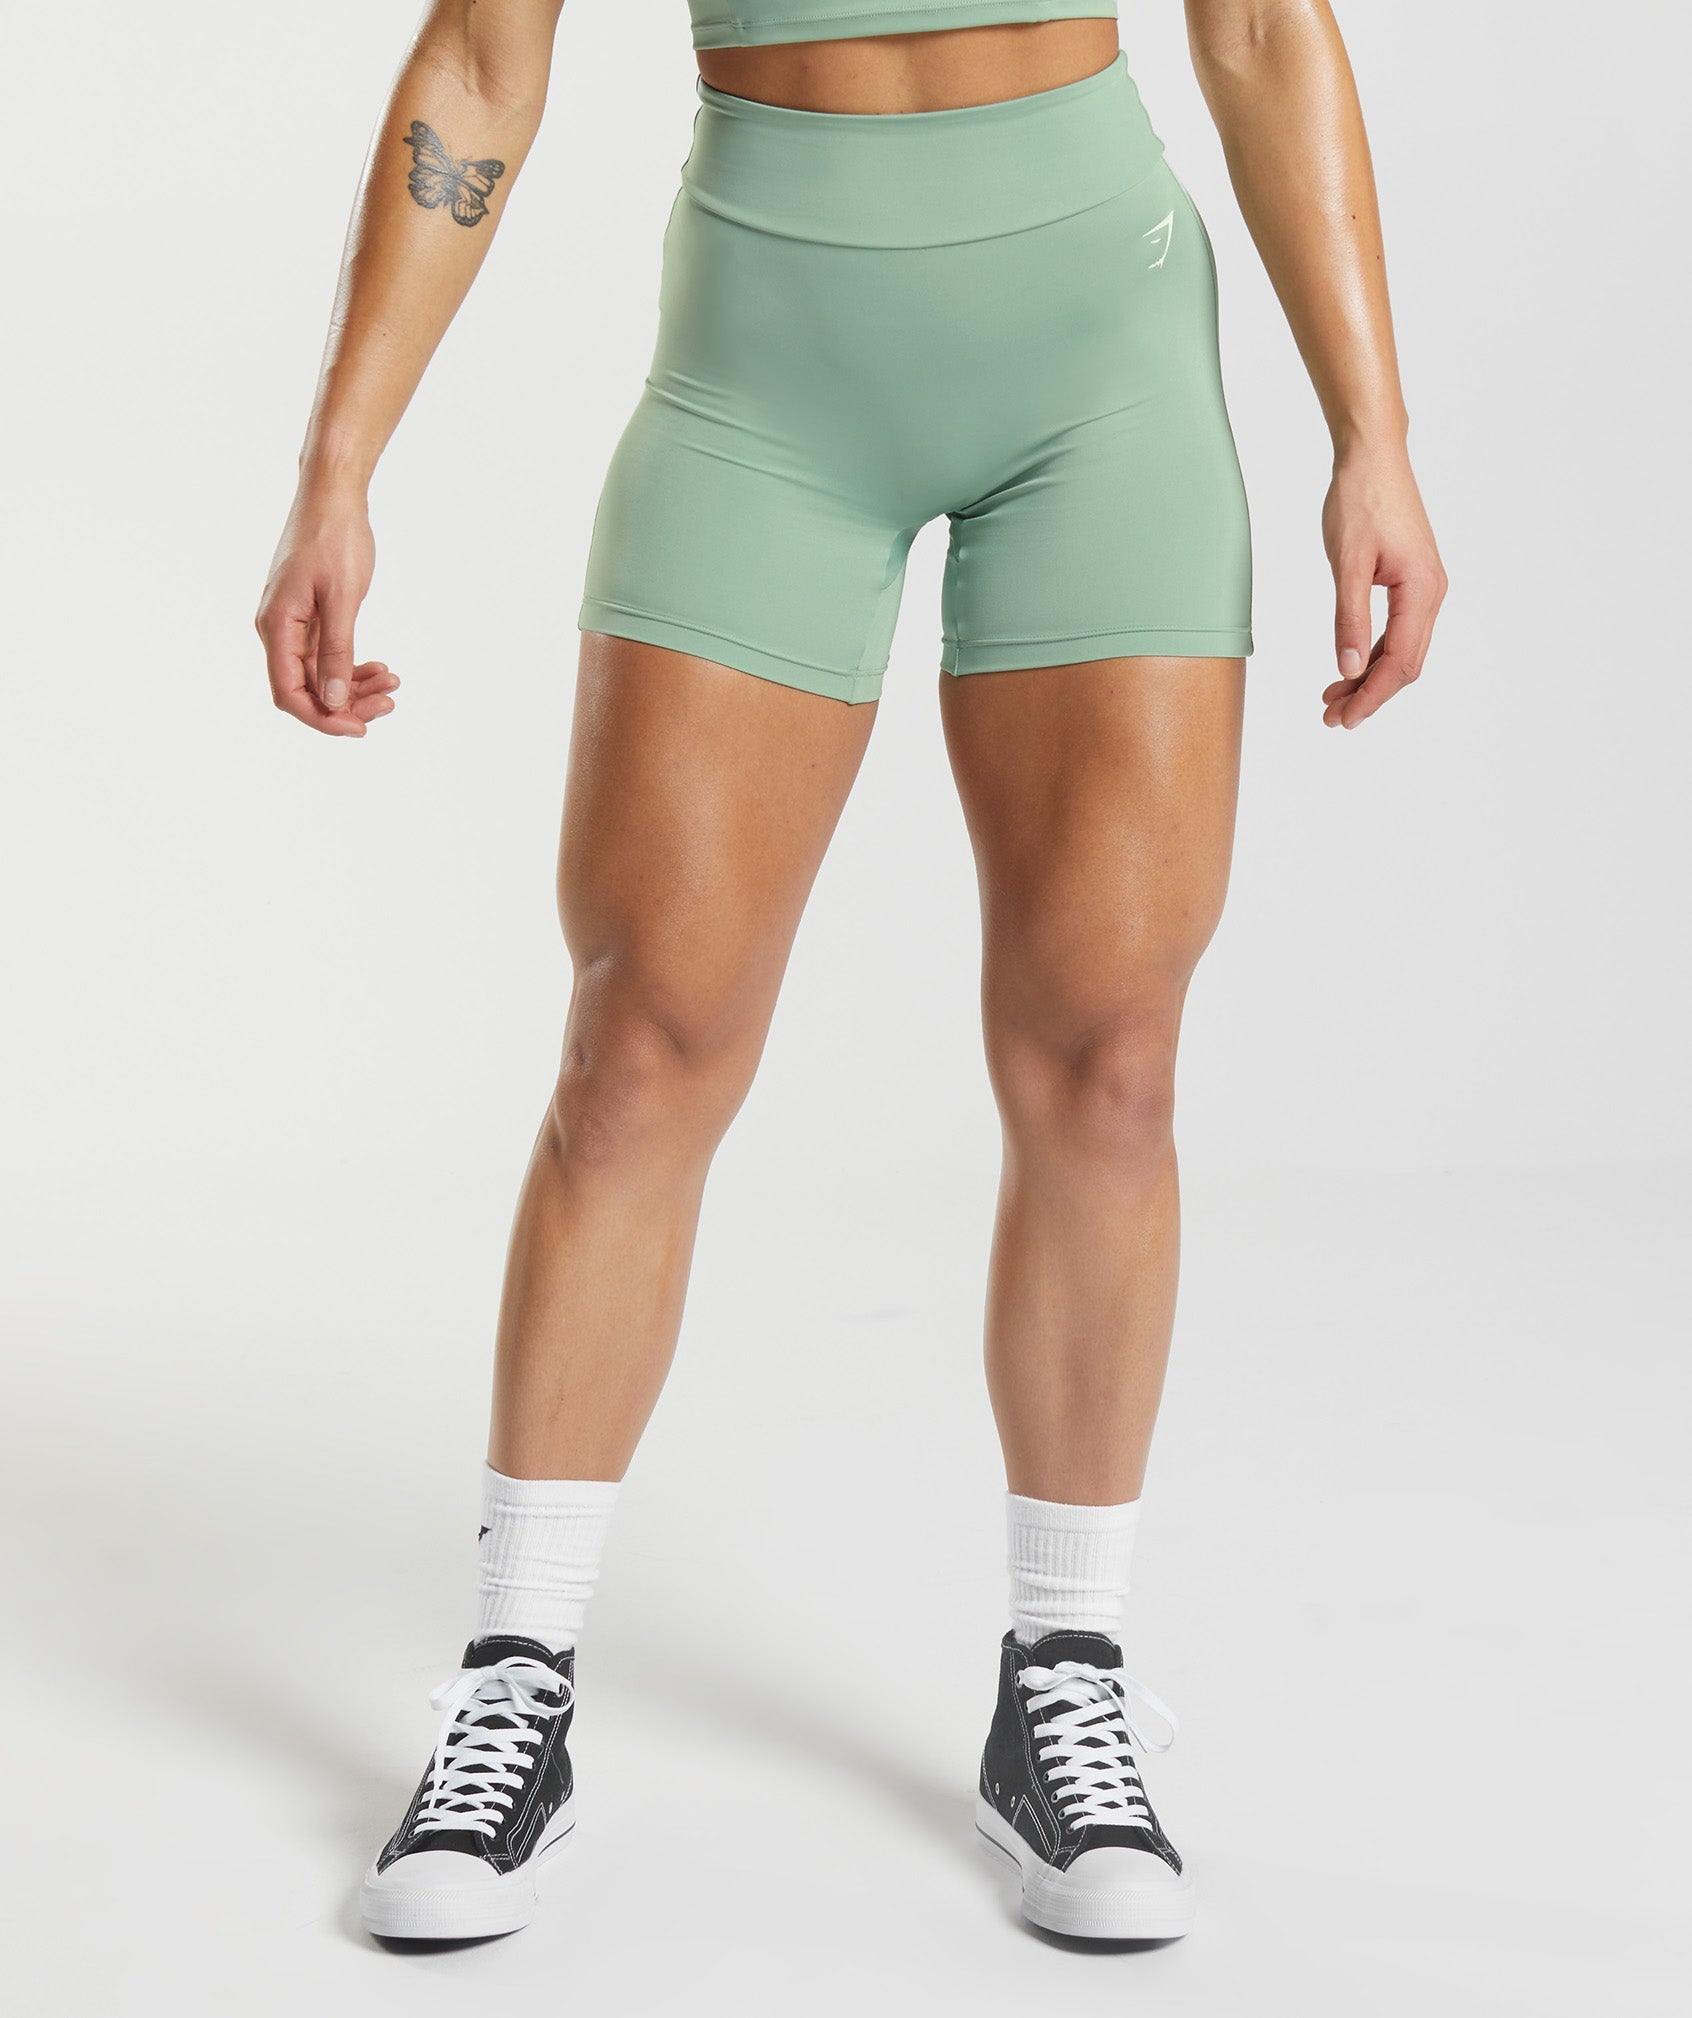 Gymshark Speed Evolve 3 2 In 1 Womens Shorts Small - color cantaloupe  green